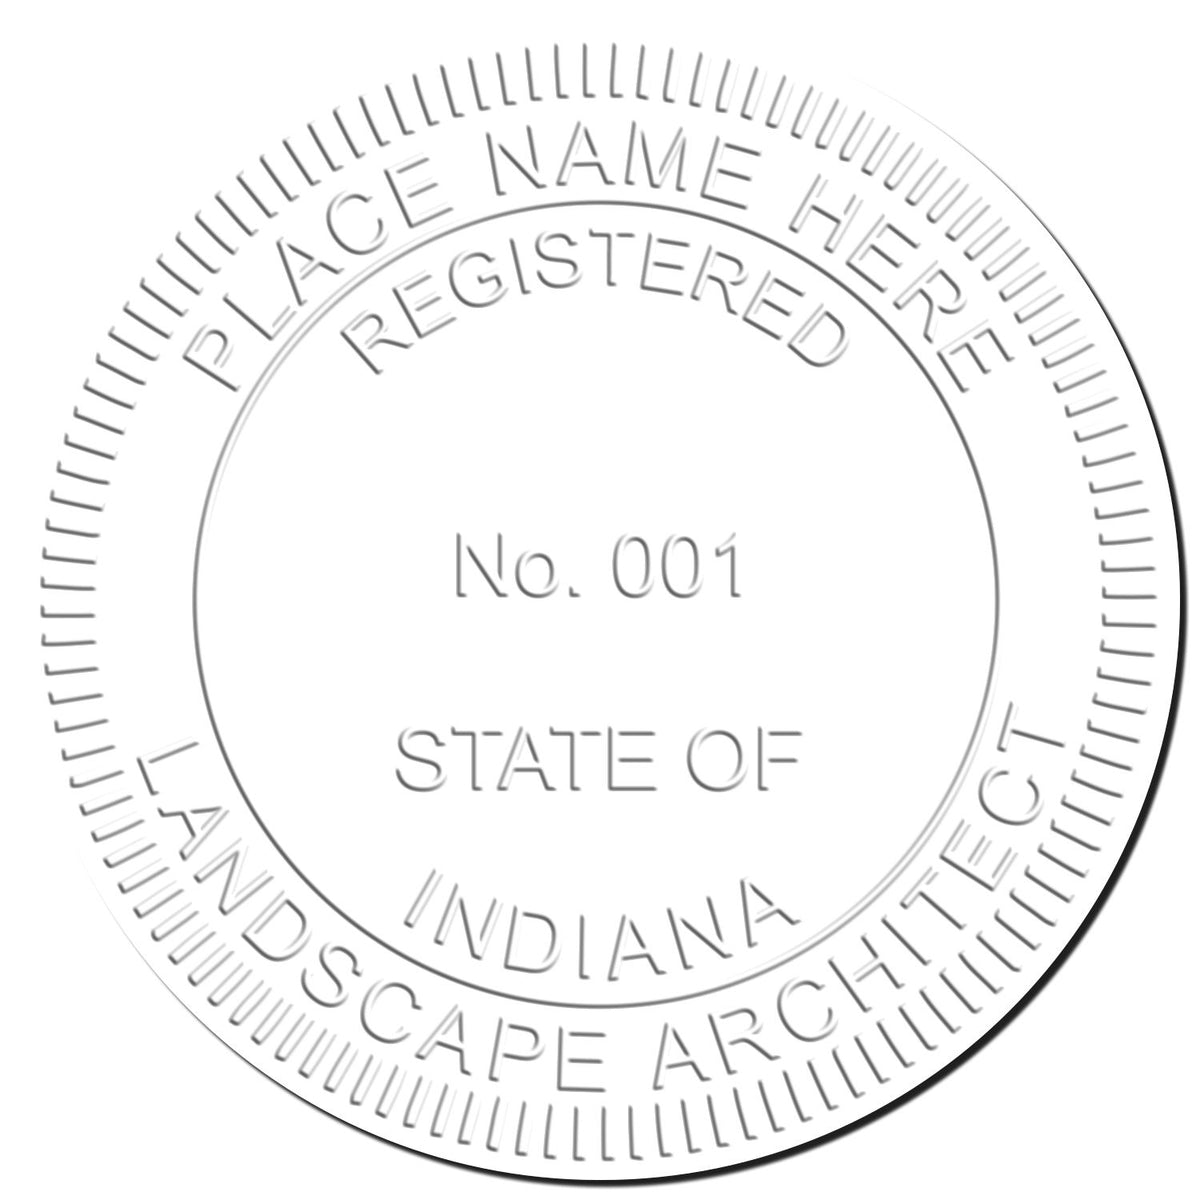 This paper is stamped with a sample imprint of the Gift Indiana Landscape Architect Seal, signifying its quality and reliability.